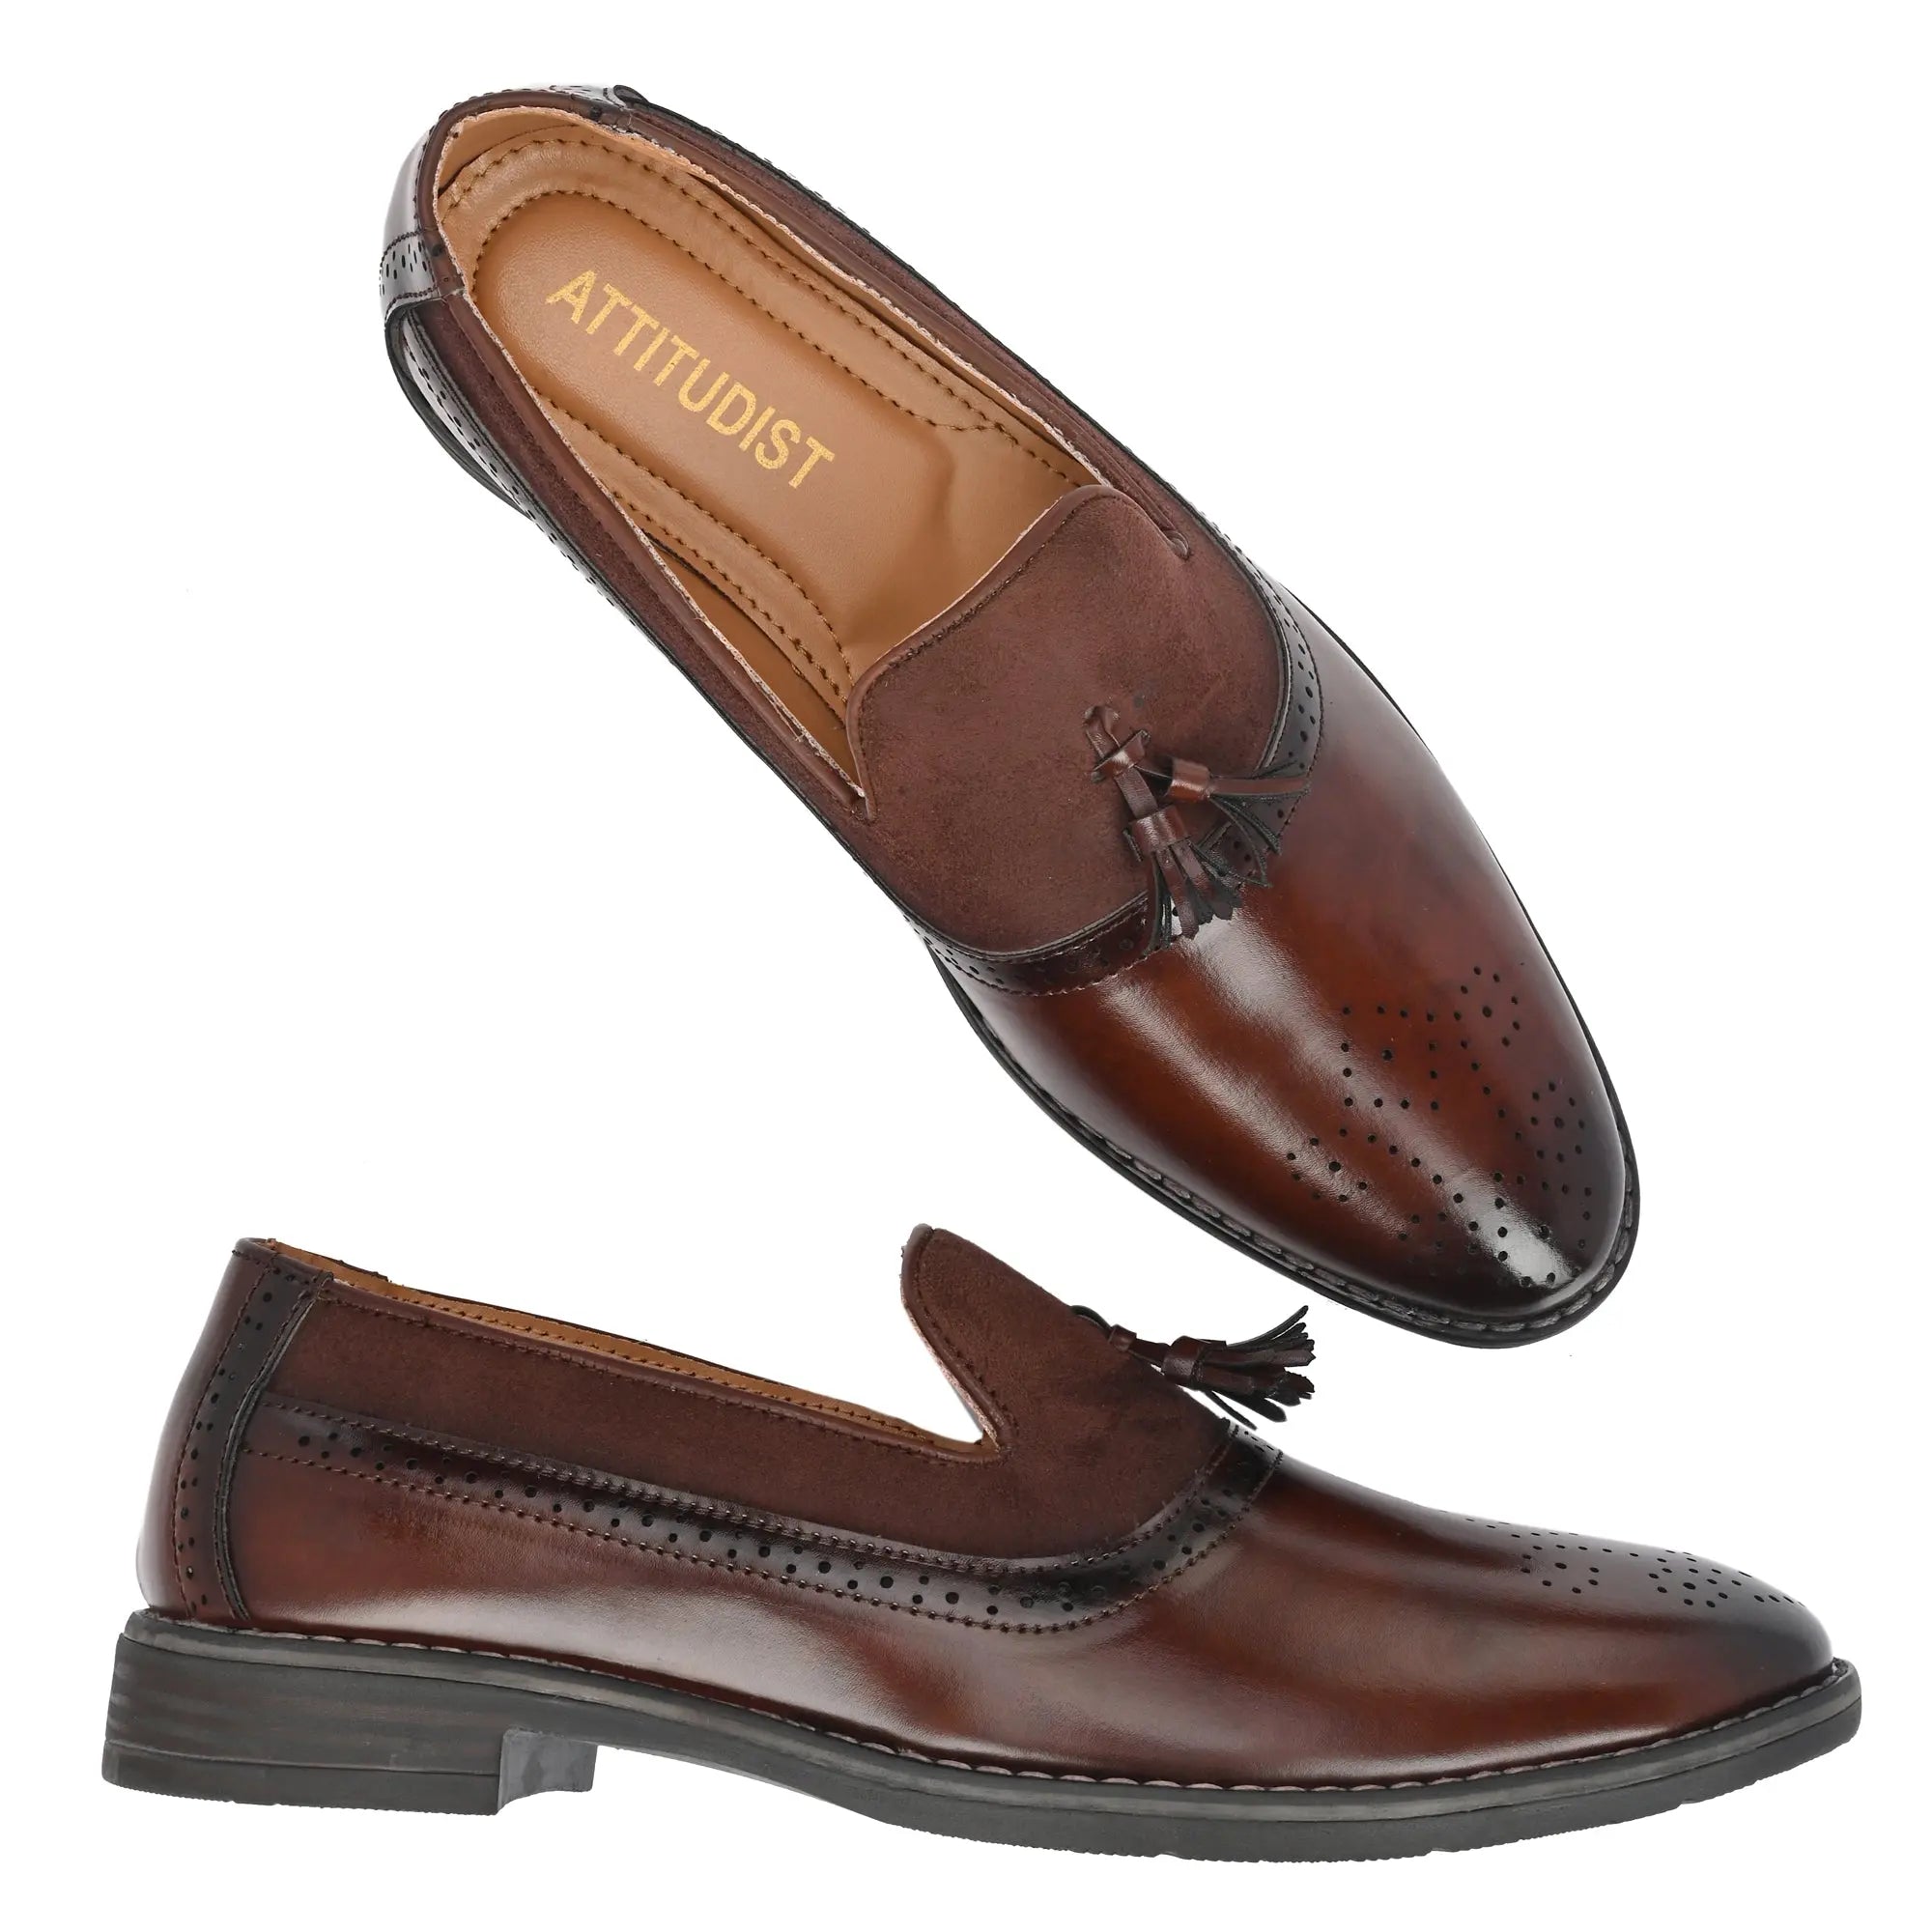 brown-loafers-attitudist-shoes-for-men-with-tassel-sp3b